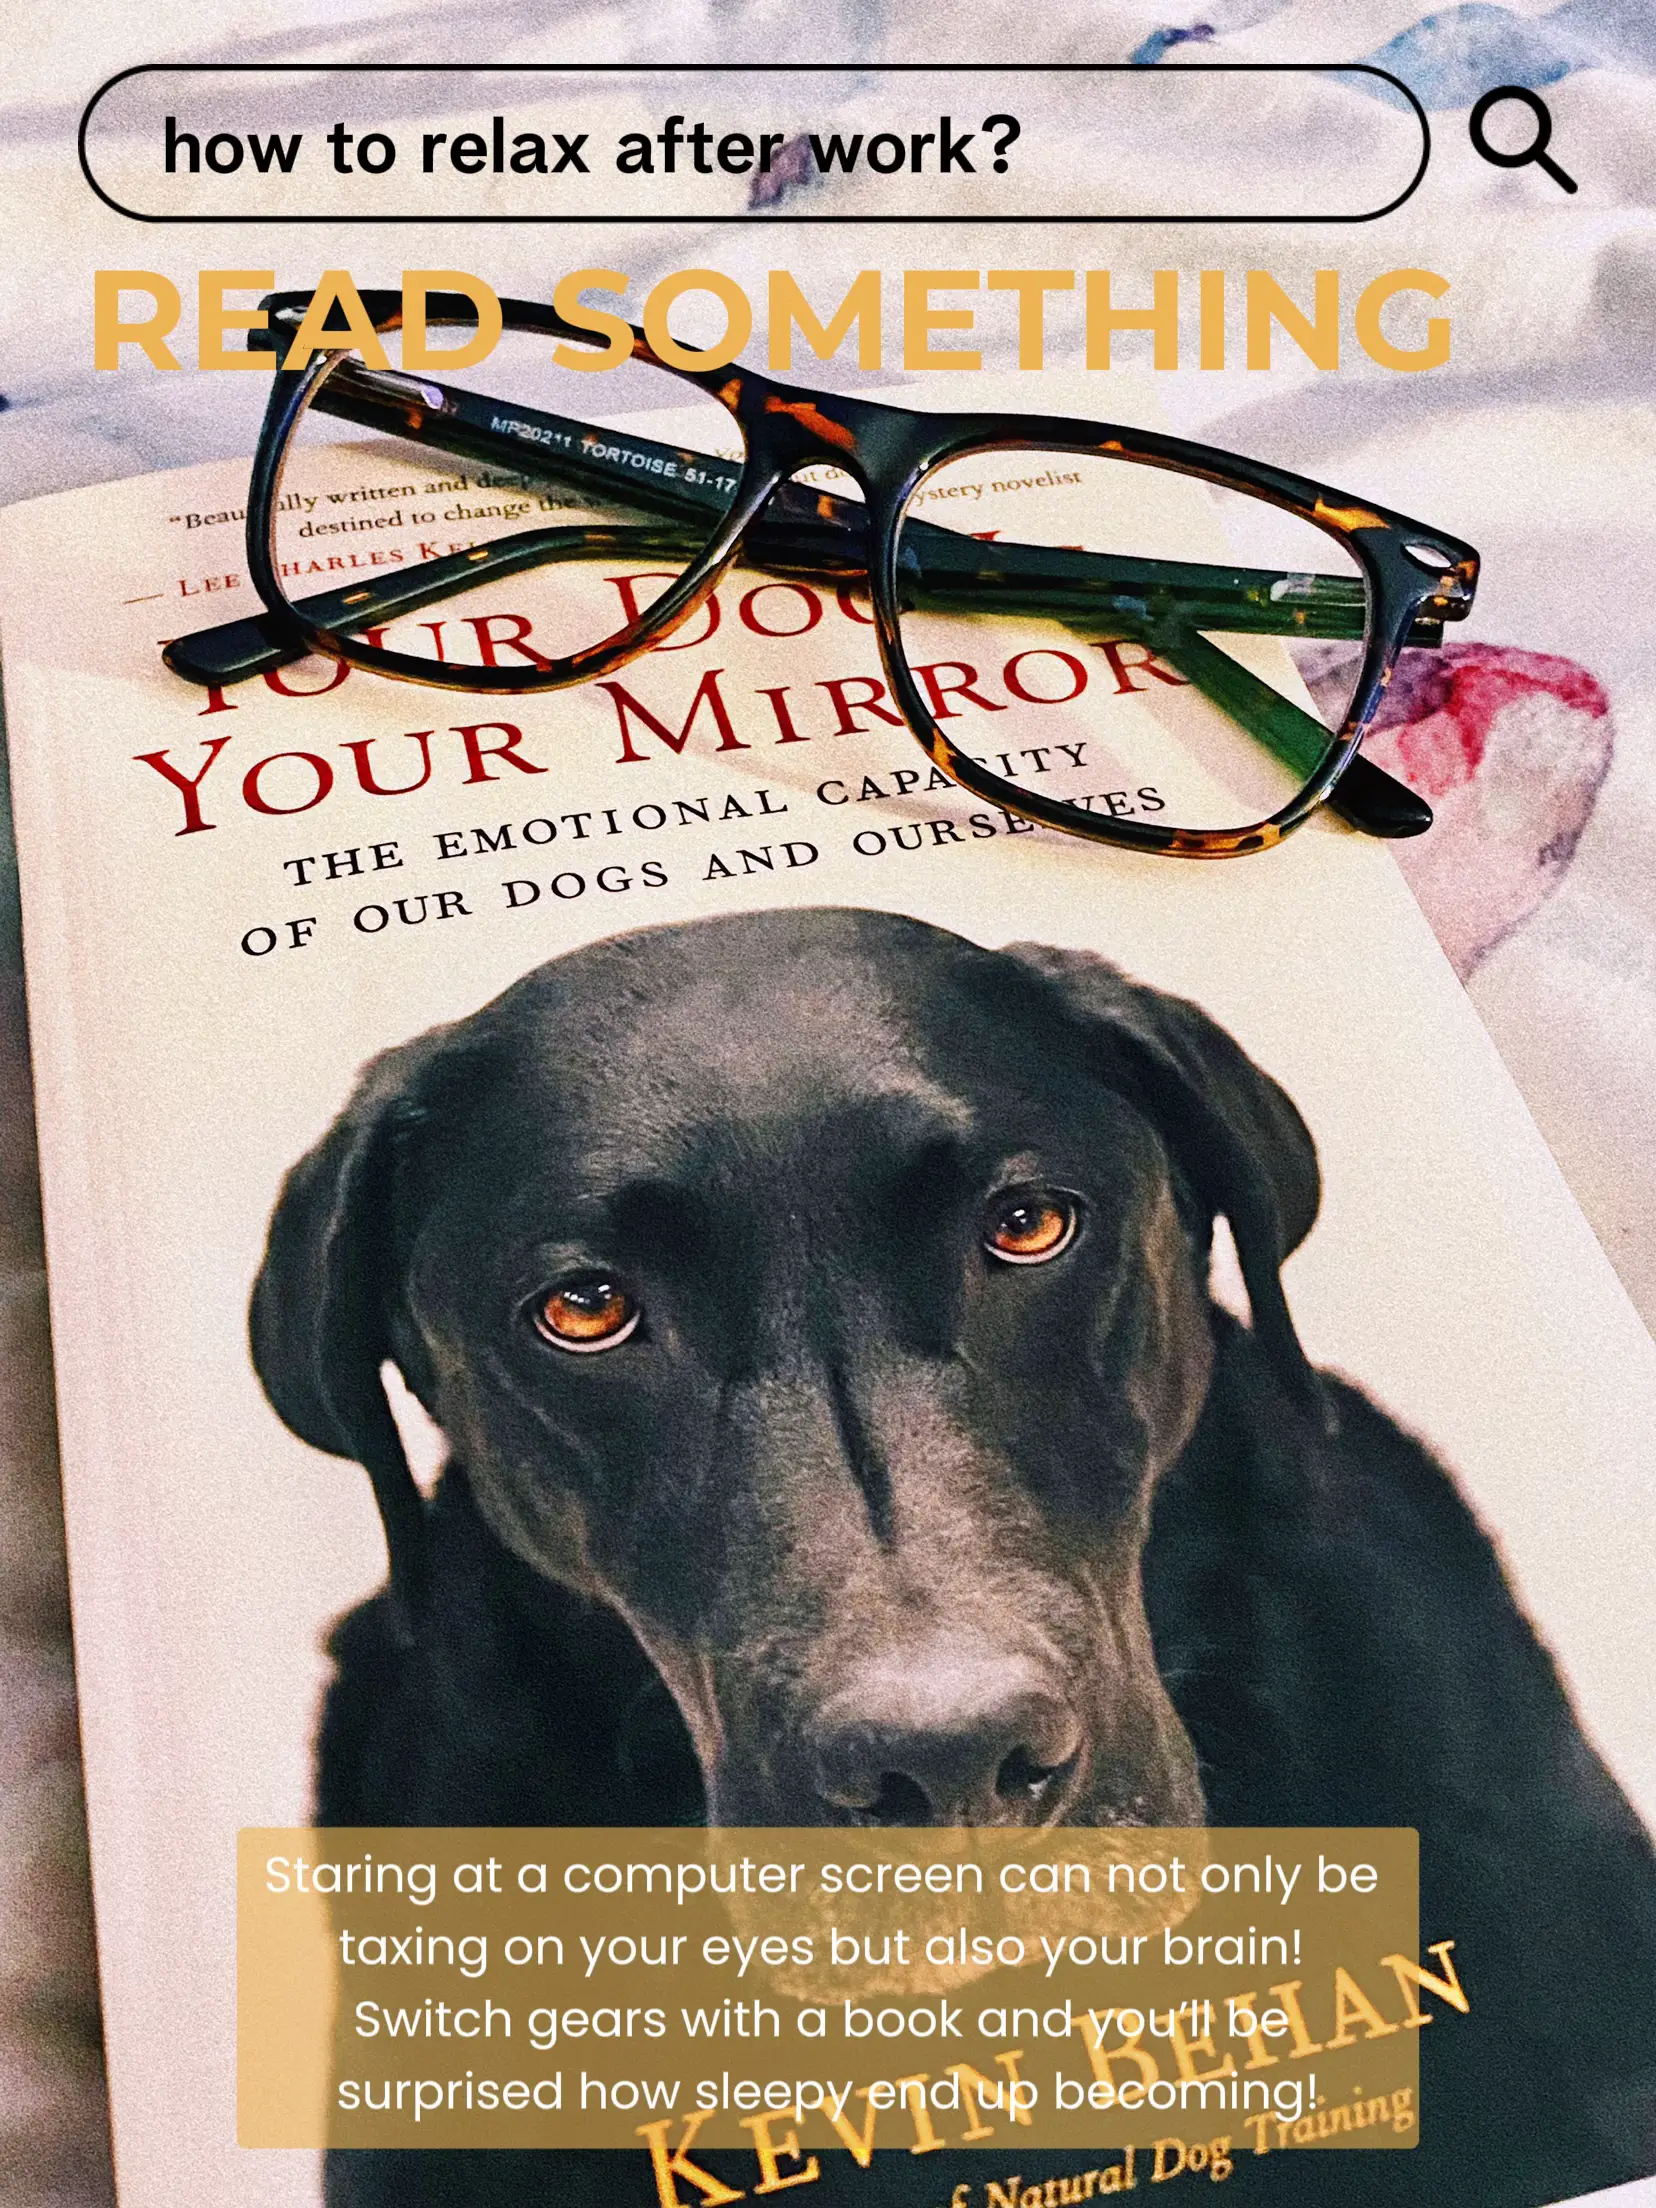 your dog is your mirror pdf - Lemon8 Search